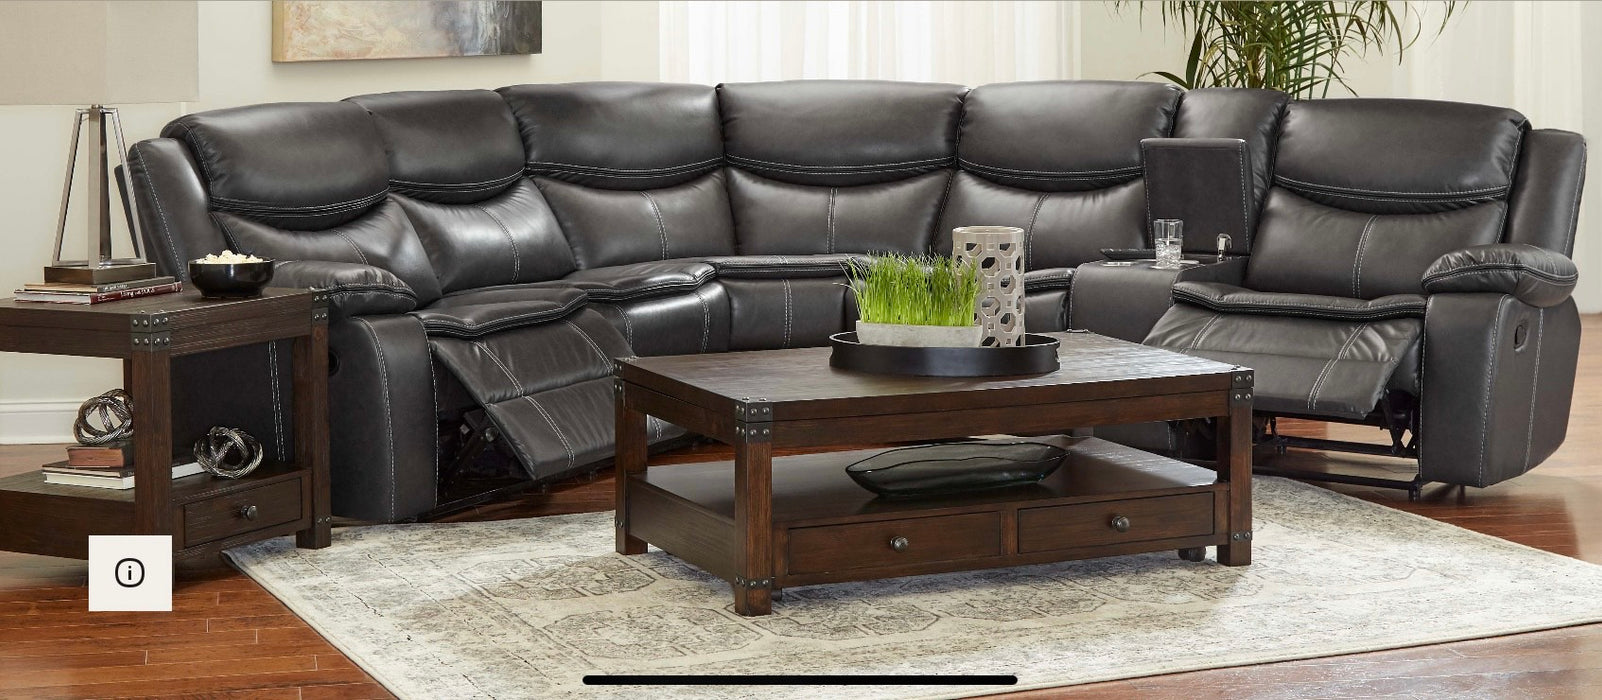 3 piece Reclining Sectional - Charcoal